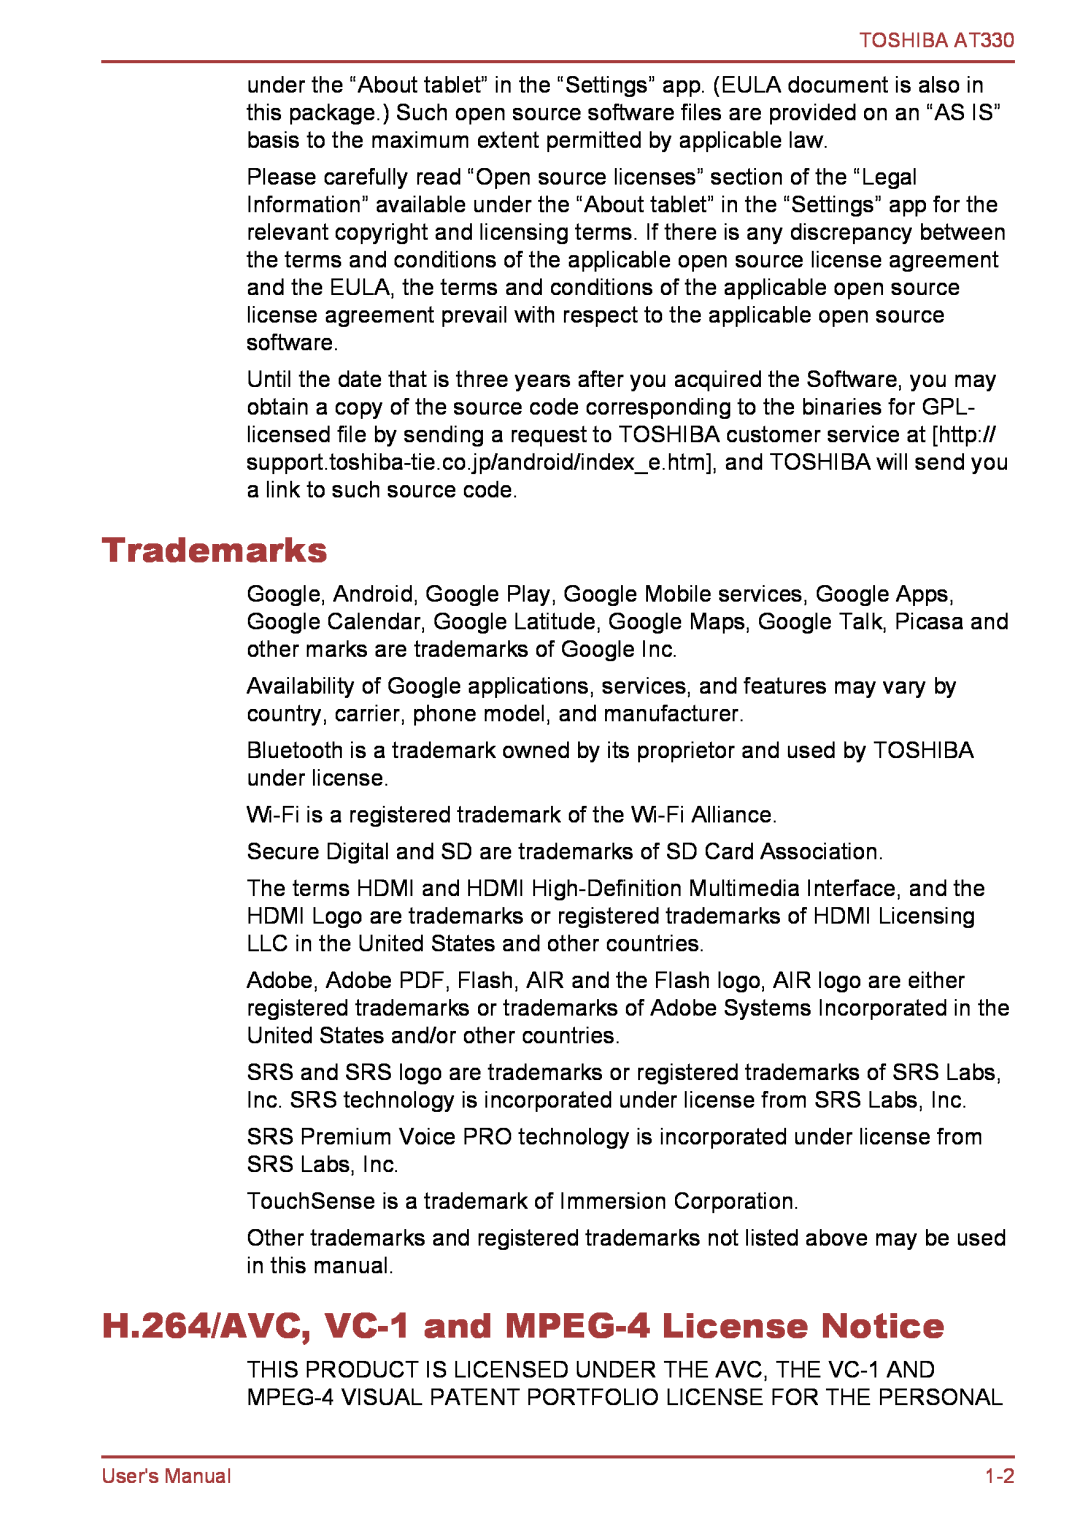 Toshiba at330 user manual Trademarks, H.264/AVC, VC-1 and MPEG-4 License Notice 